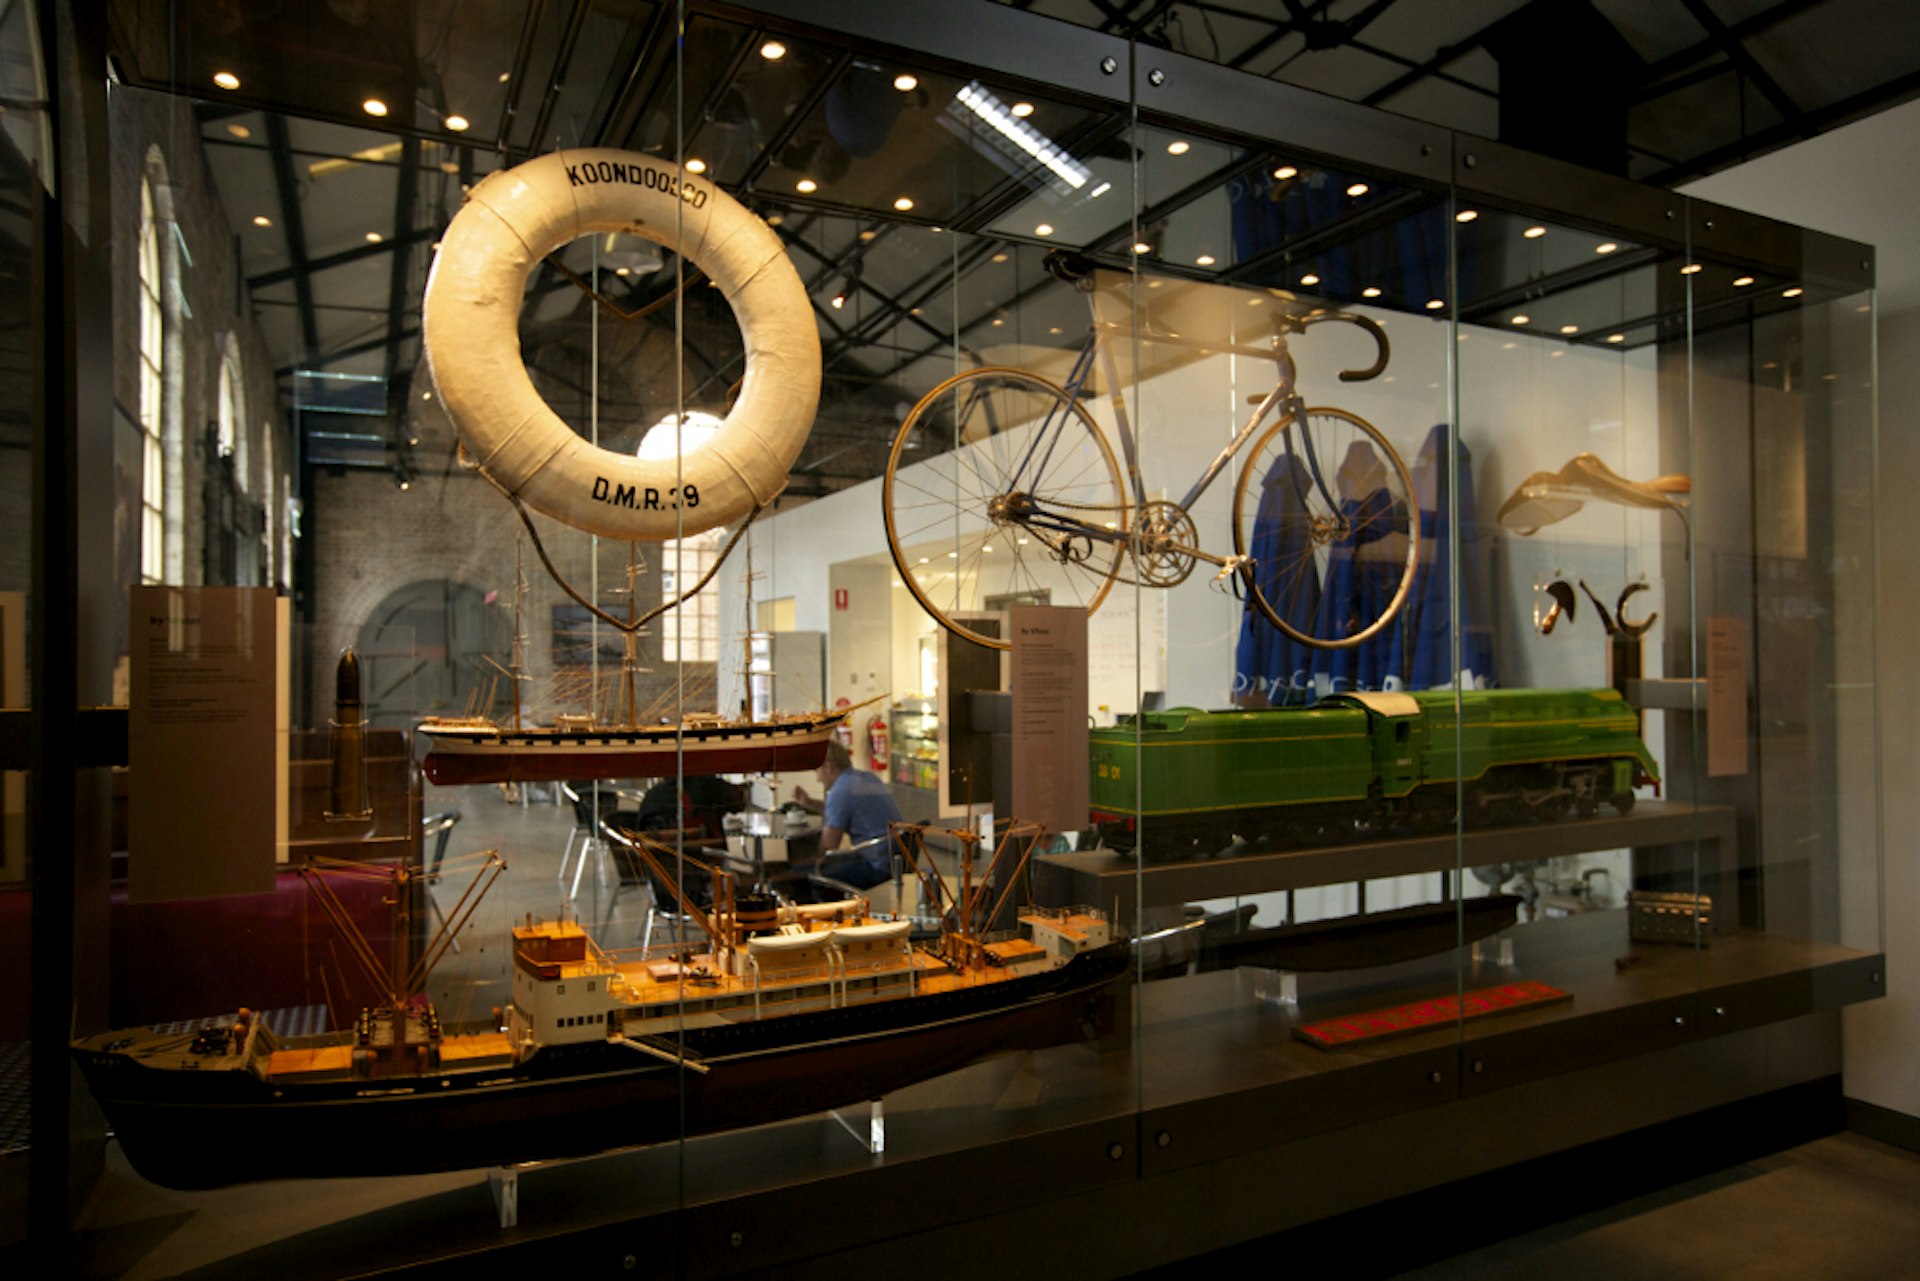 Inside the Newcastle Museum at Workshop Way. Image by Lonely Planet / Getty Images